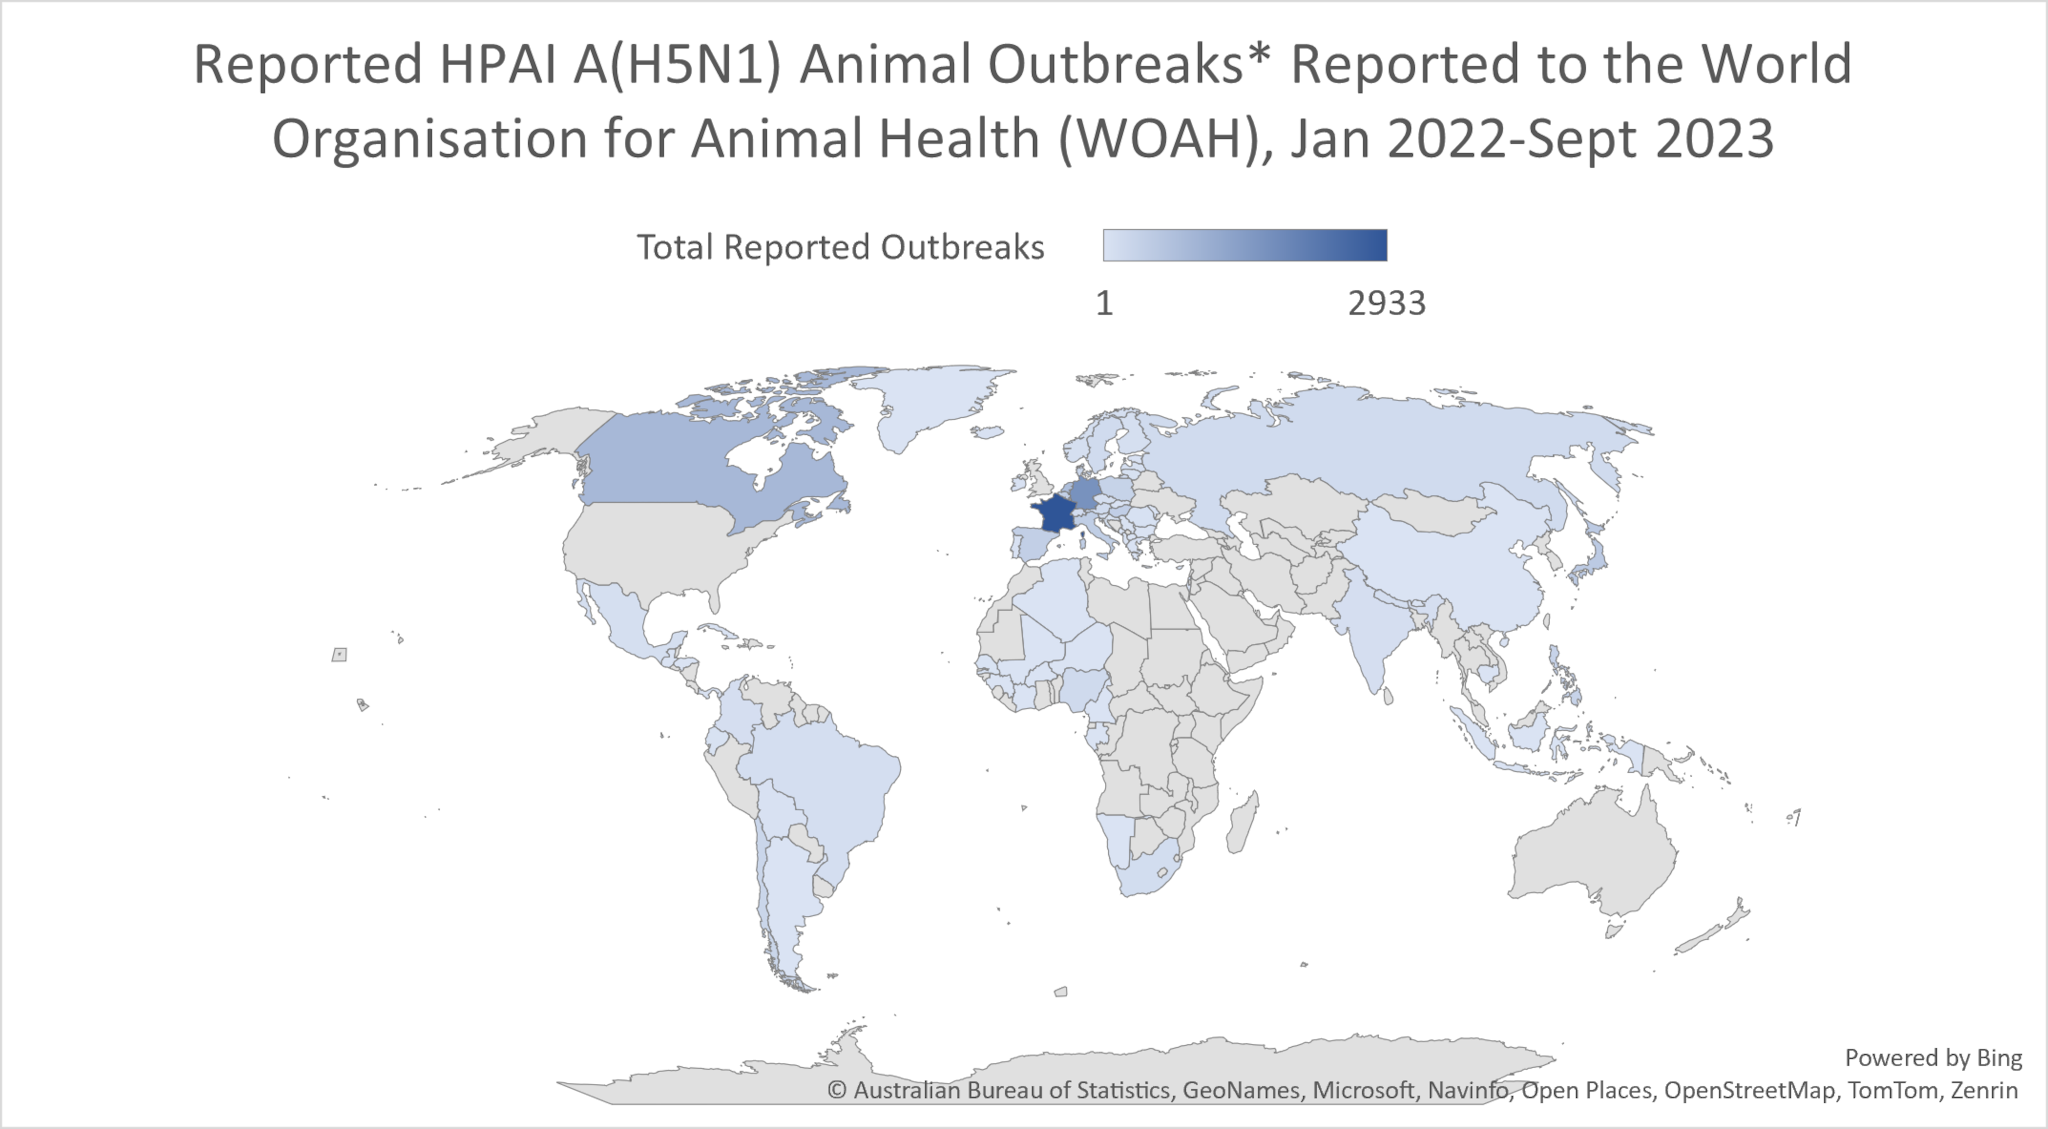 Reported HPAI A(H5N1) Bird Outbreaks* Reported to the World Organisation for Animal Health (WOAH), Jan 2022-December 2023